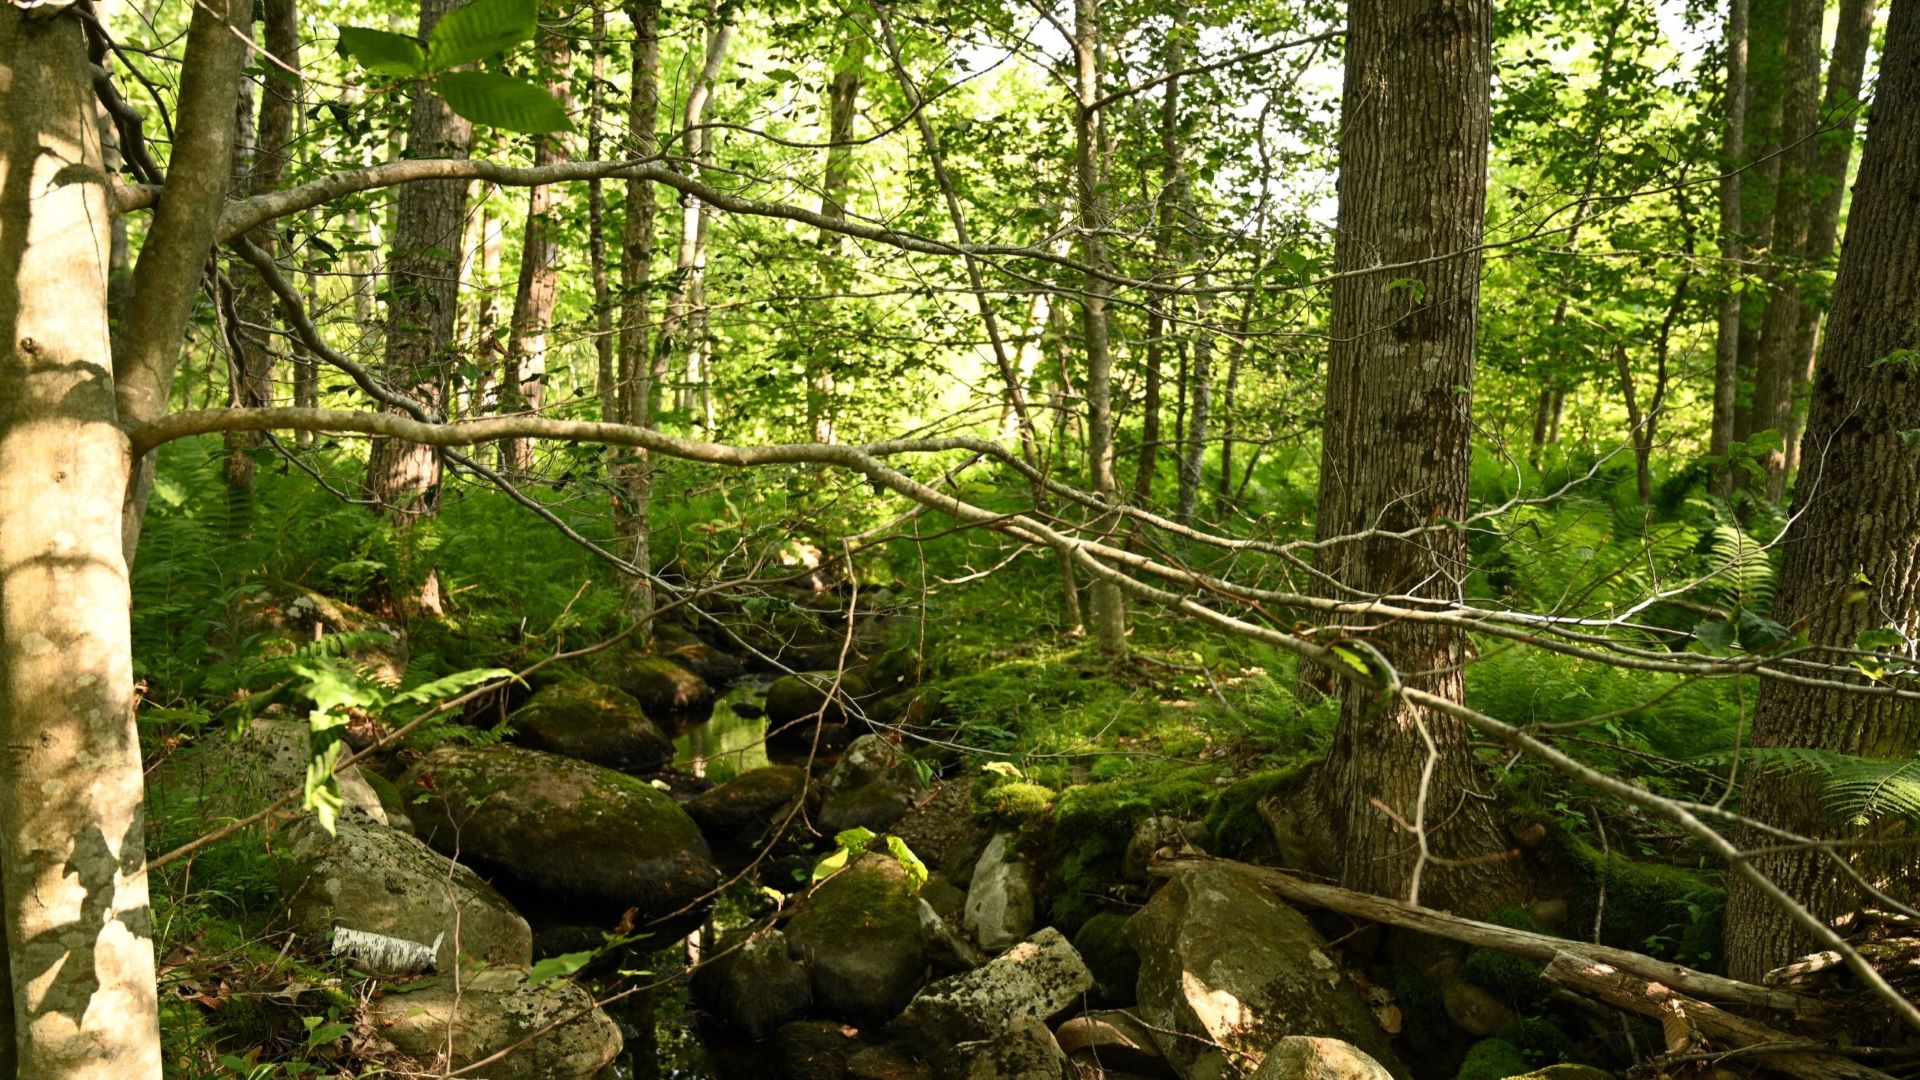 Can’t save the forest for the trees: Confronting the loss of species that define Maine woodlands